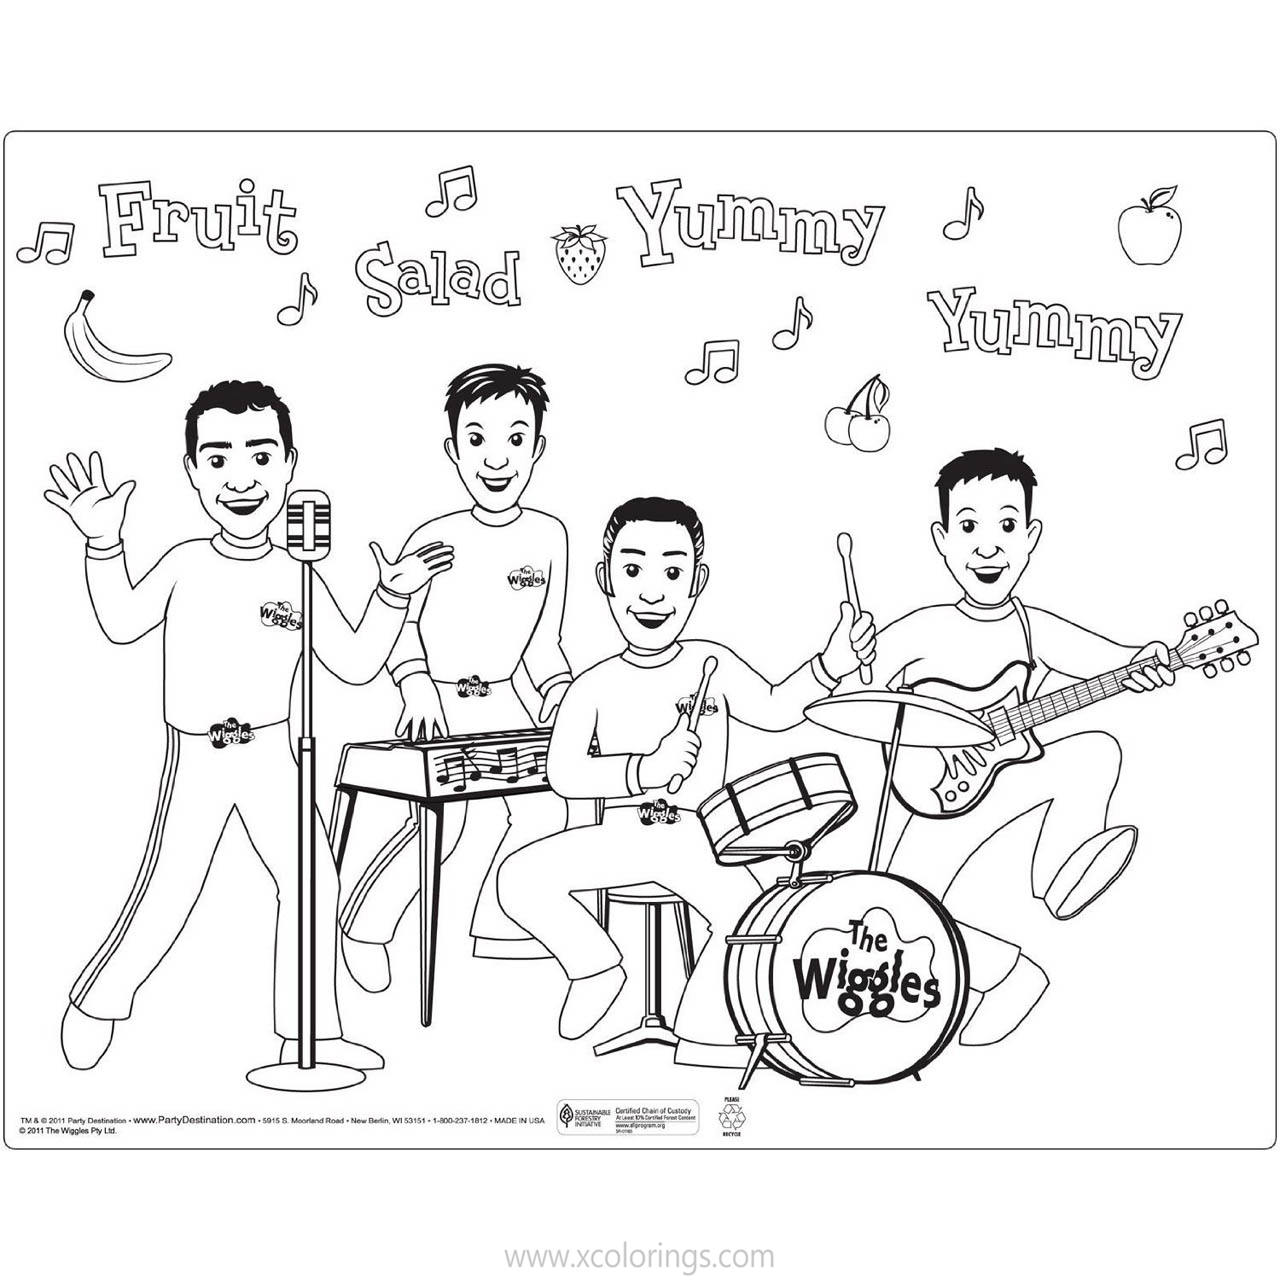 Free Wiggles Coloring Pages Fruit Salad Yummy Yummy printable